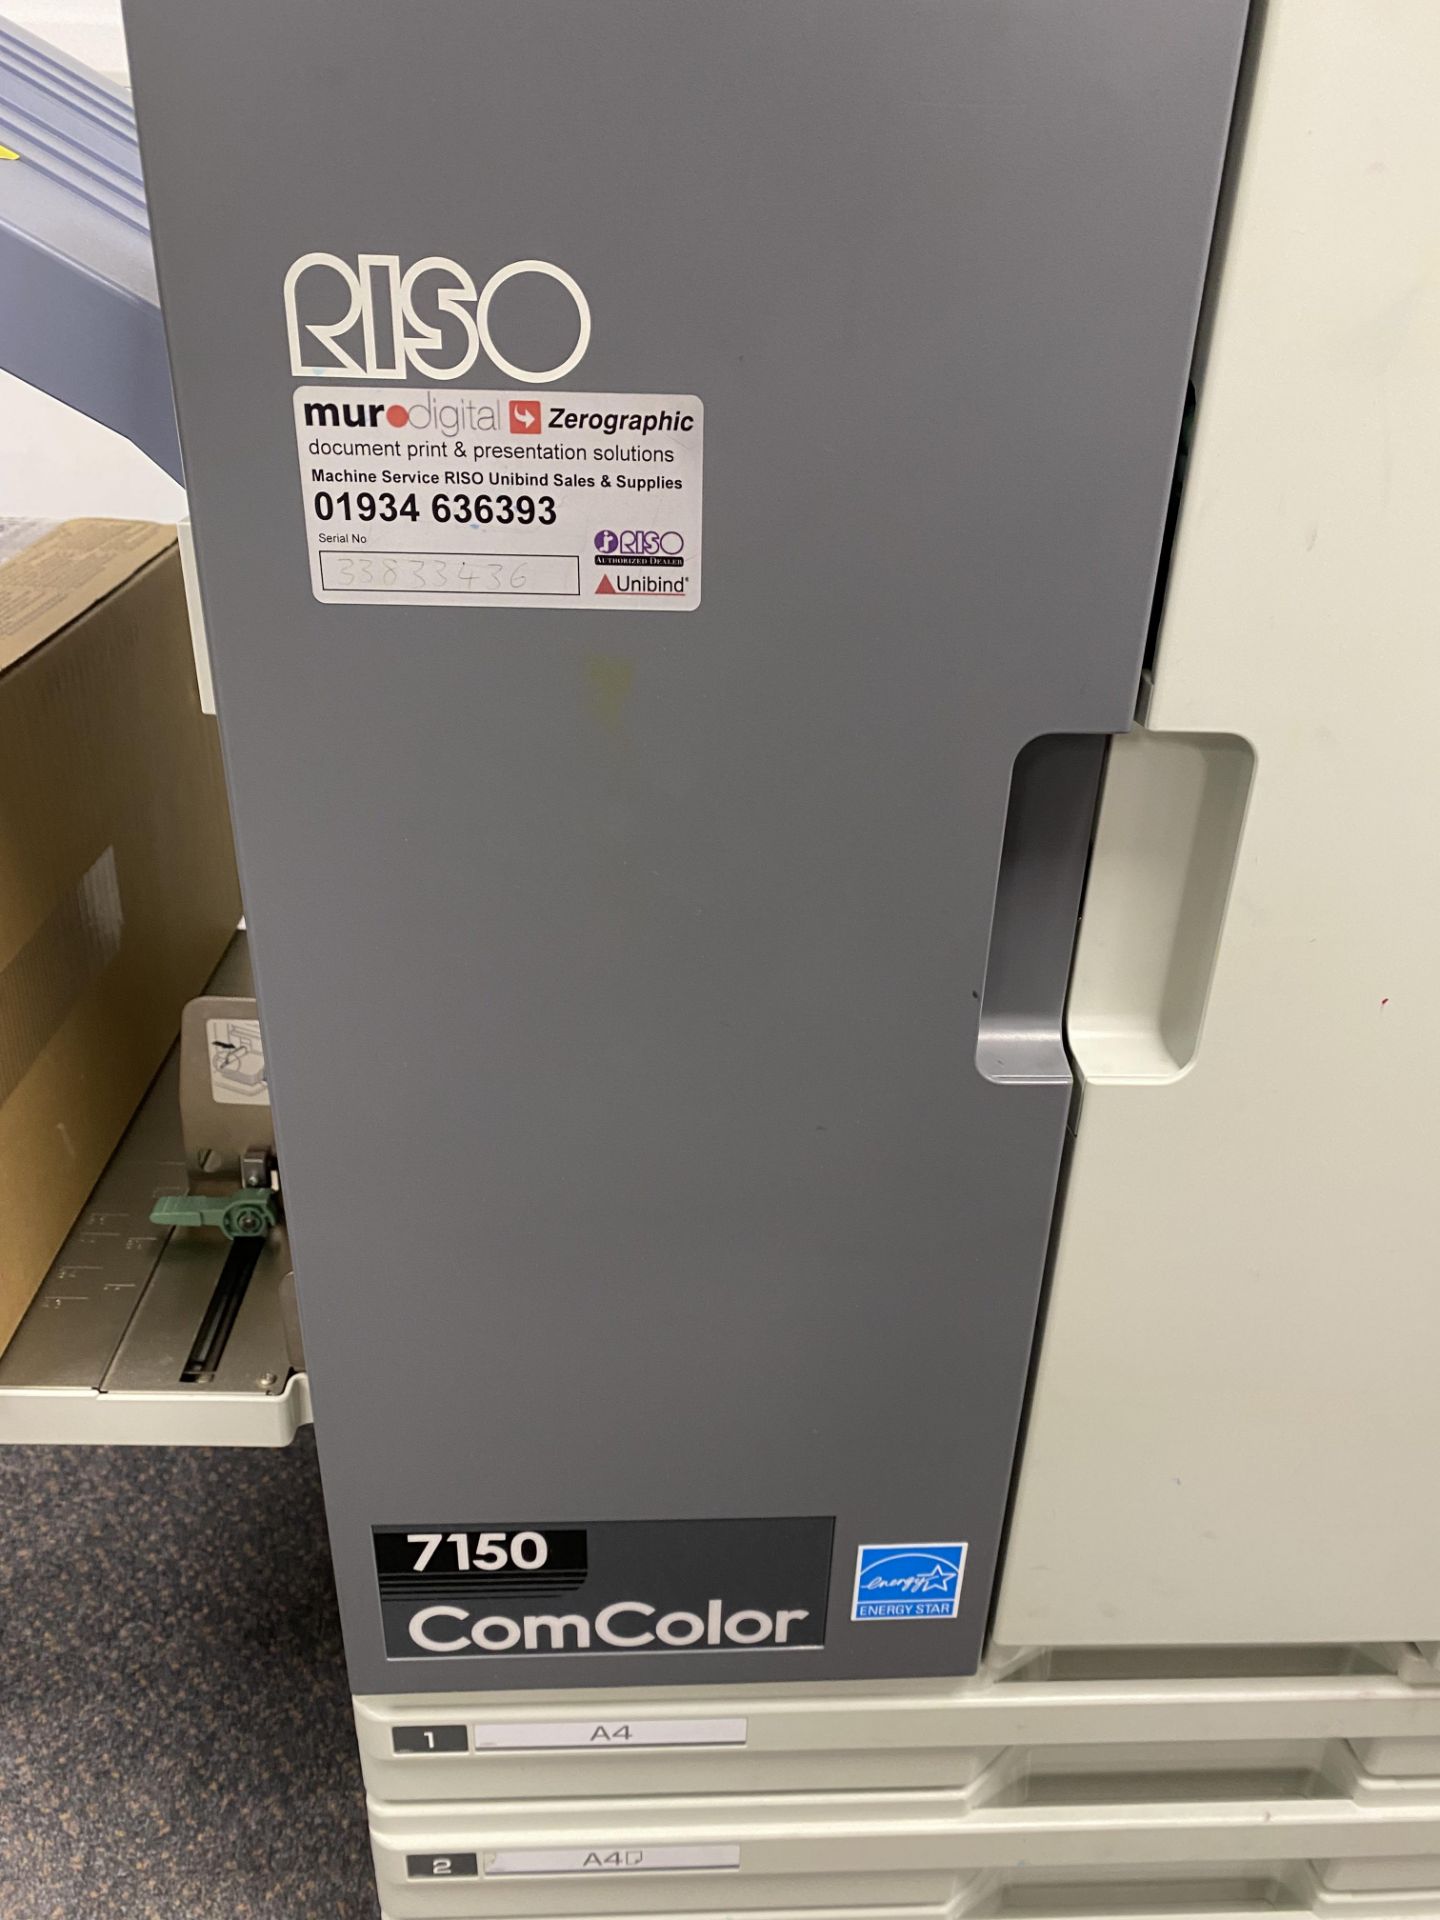 Riso Comcolor 7150 printer (including ink cartridge) - Image 2 of 3